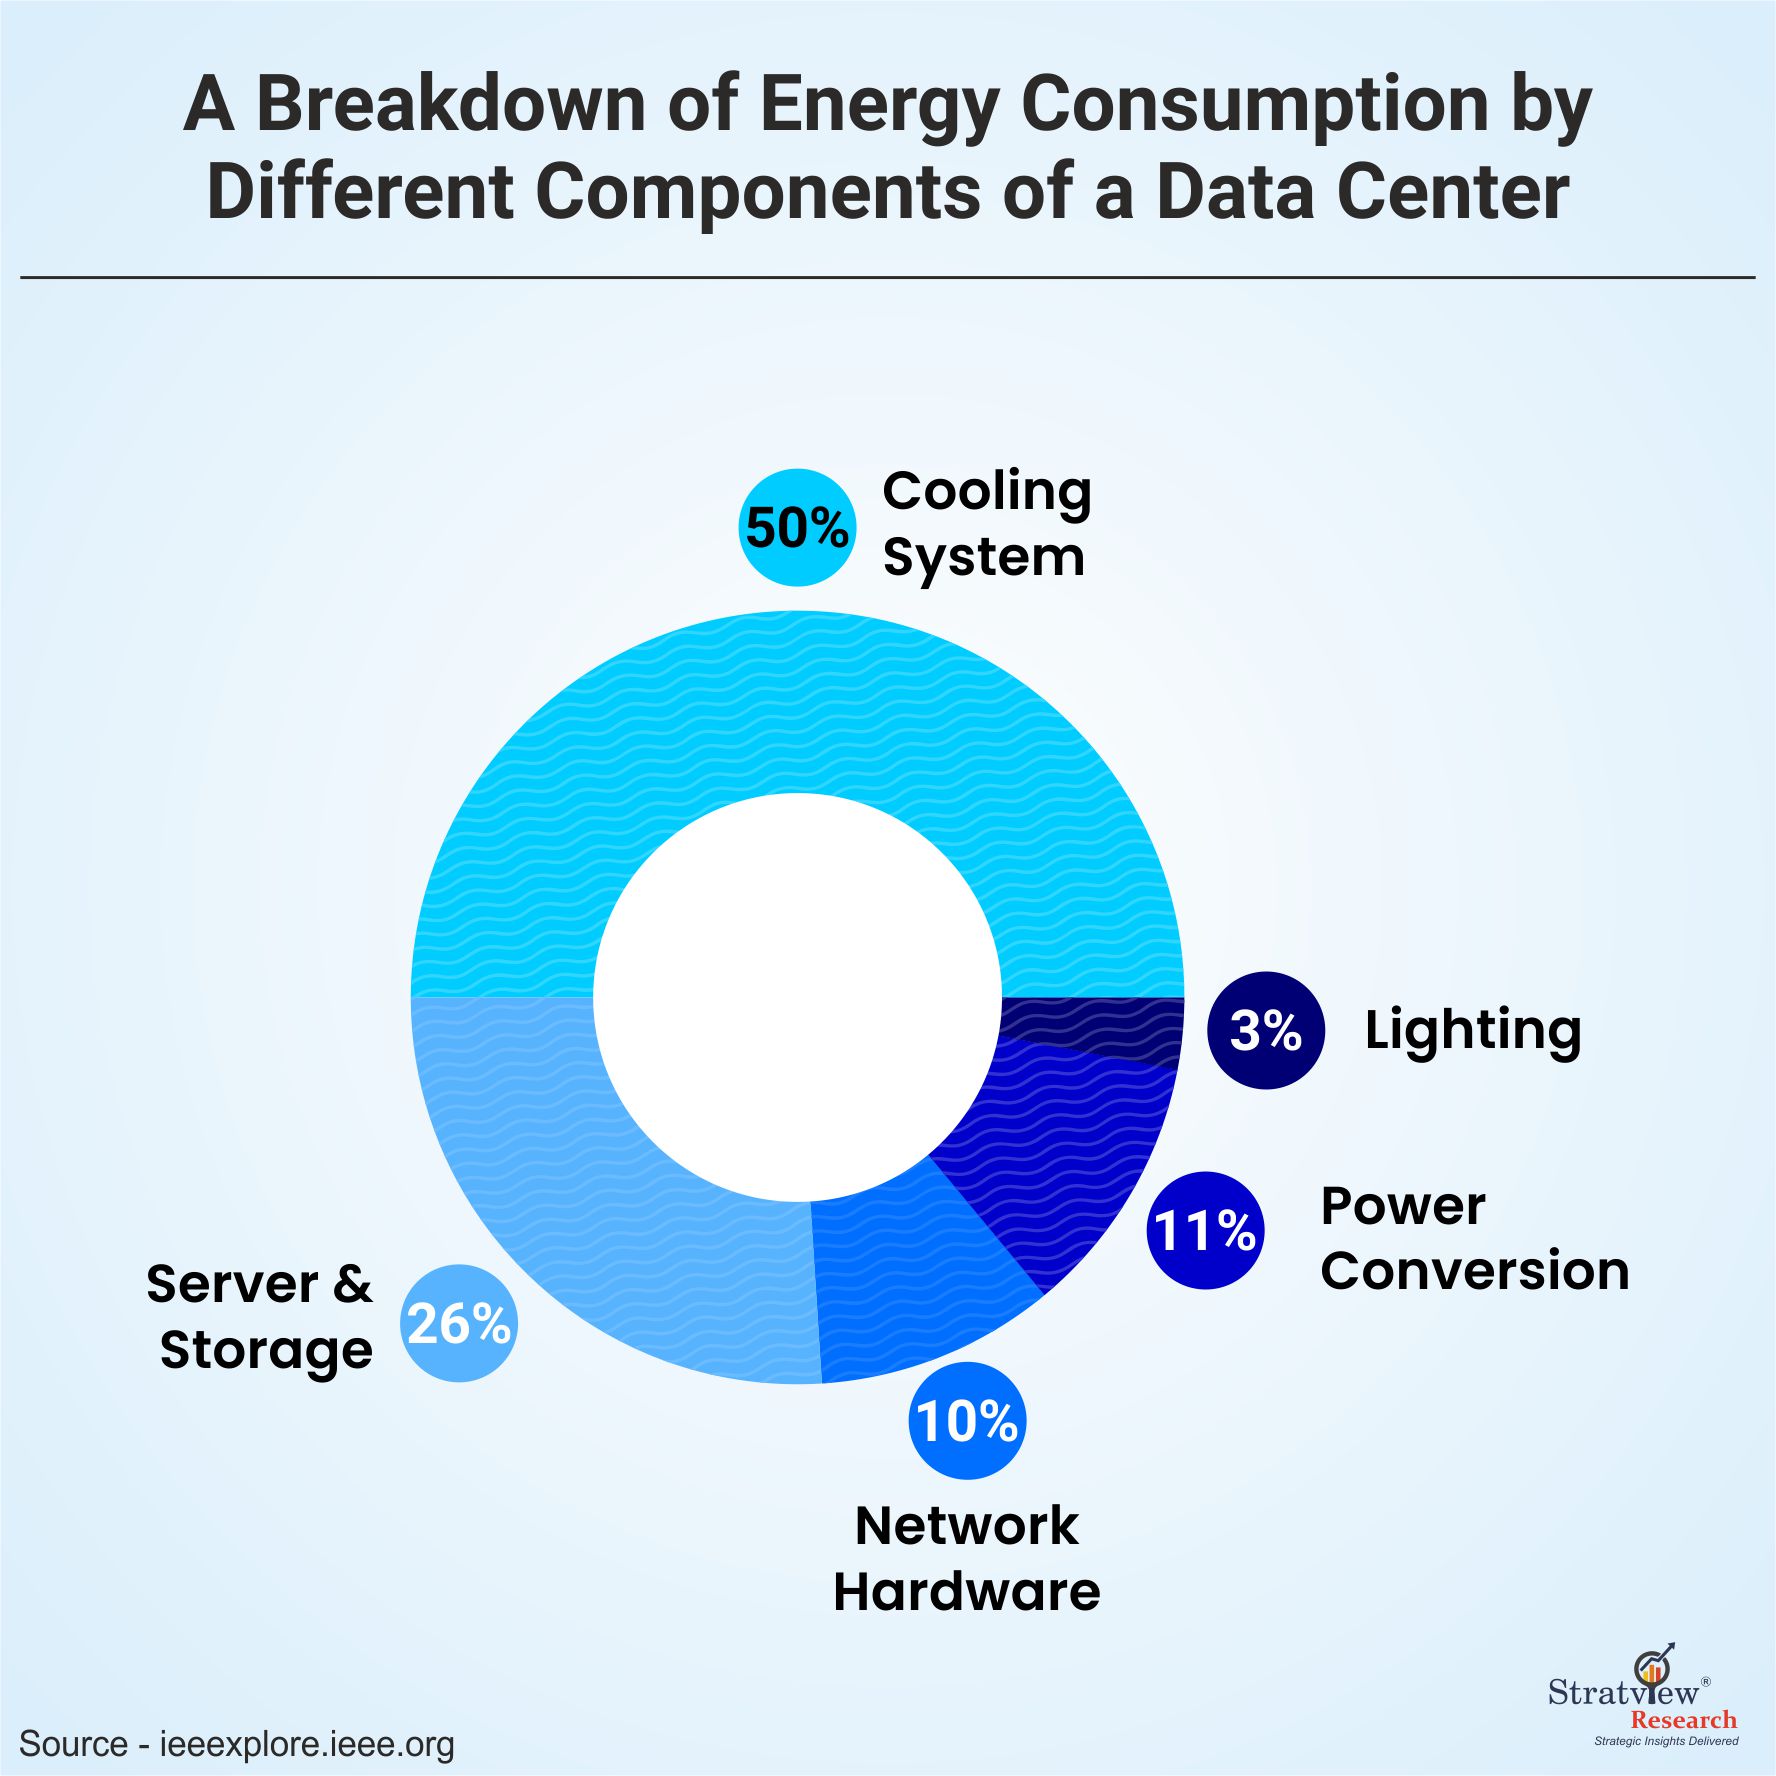 A breakdown of energy consumption by different components of a data center